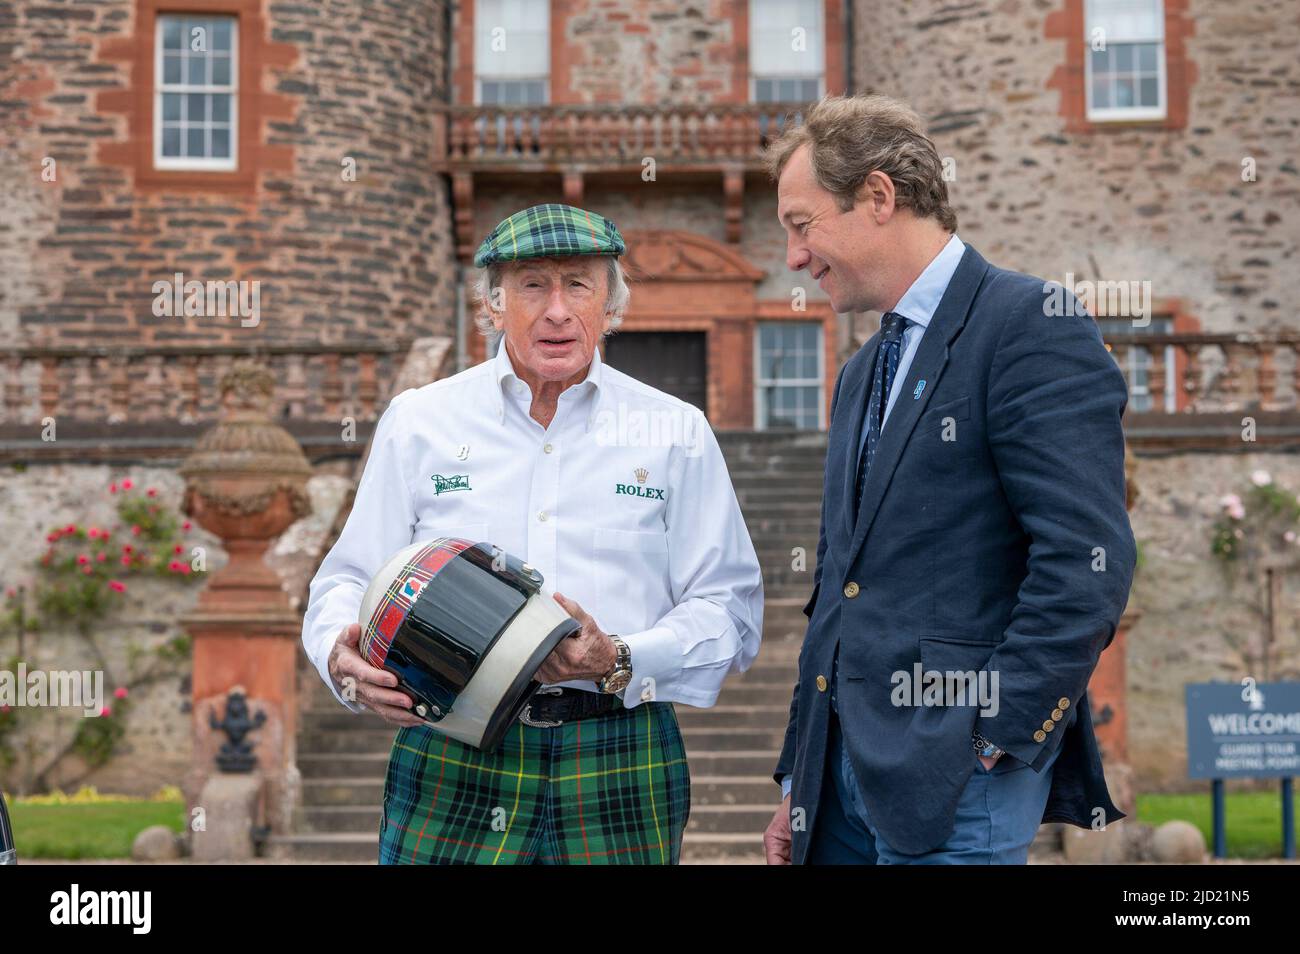 17th June 2022. Thirlestane Castle, Lauder, Scottish Borders. Sir Jackie Stewart OBE pictured with Edward Maitland-Carew.who has organised the event at his family home, Thirlestane Castle. PHOTO CAPTION Sir Jackie Stewart OBE is seen outside Thirlestane Castle in the Scottish Borders with his iconic 1969 Matra MS-80 02 which powered him to his first Formula 1 title. The Flying Scot has returned home for Scotland's biggest new motoring event, the Sir Jackie Stewart Classic - presented by Rolex, taking place this weekend (18th & 19th June). Set to be a thrilling weekend for avid motorsp Stock Photo